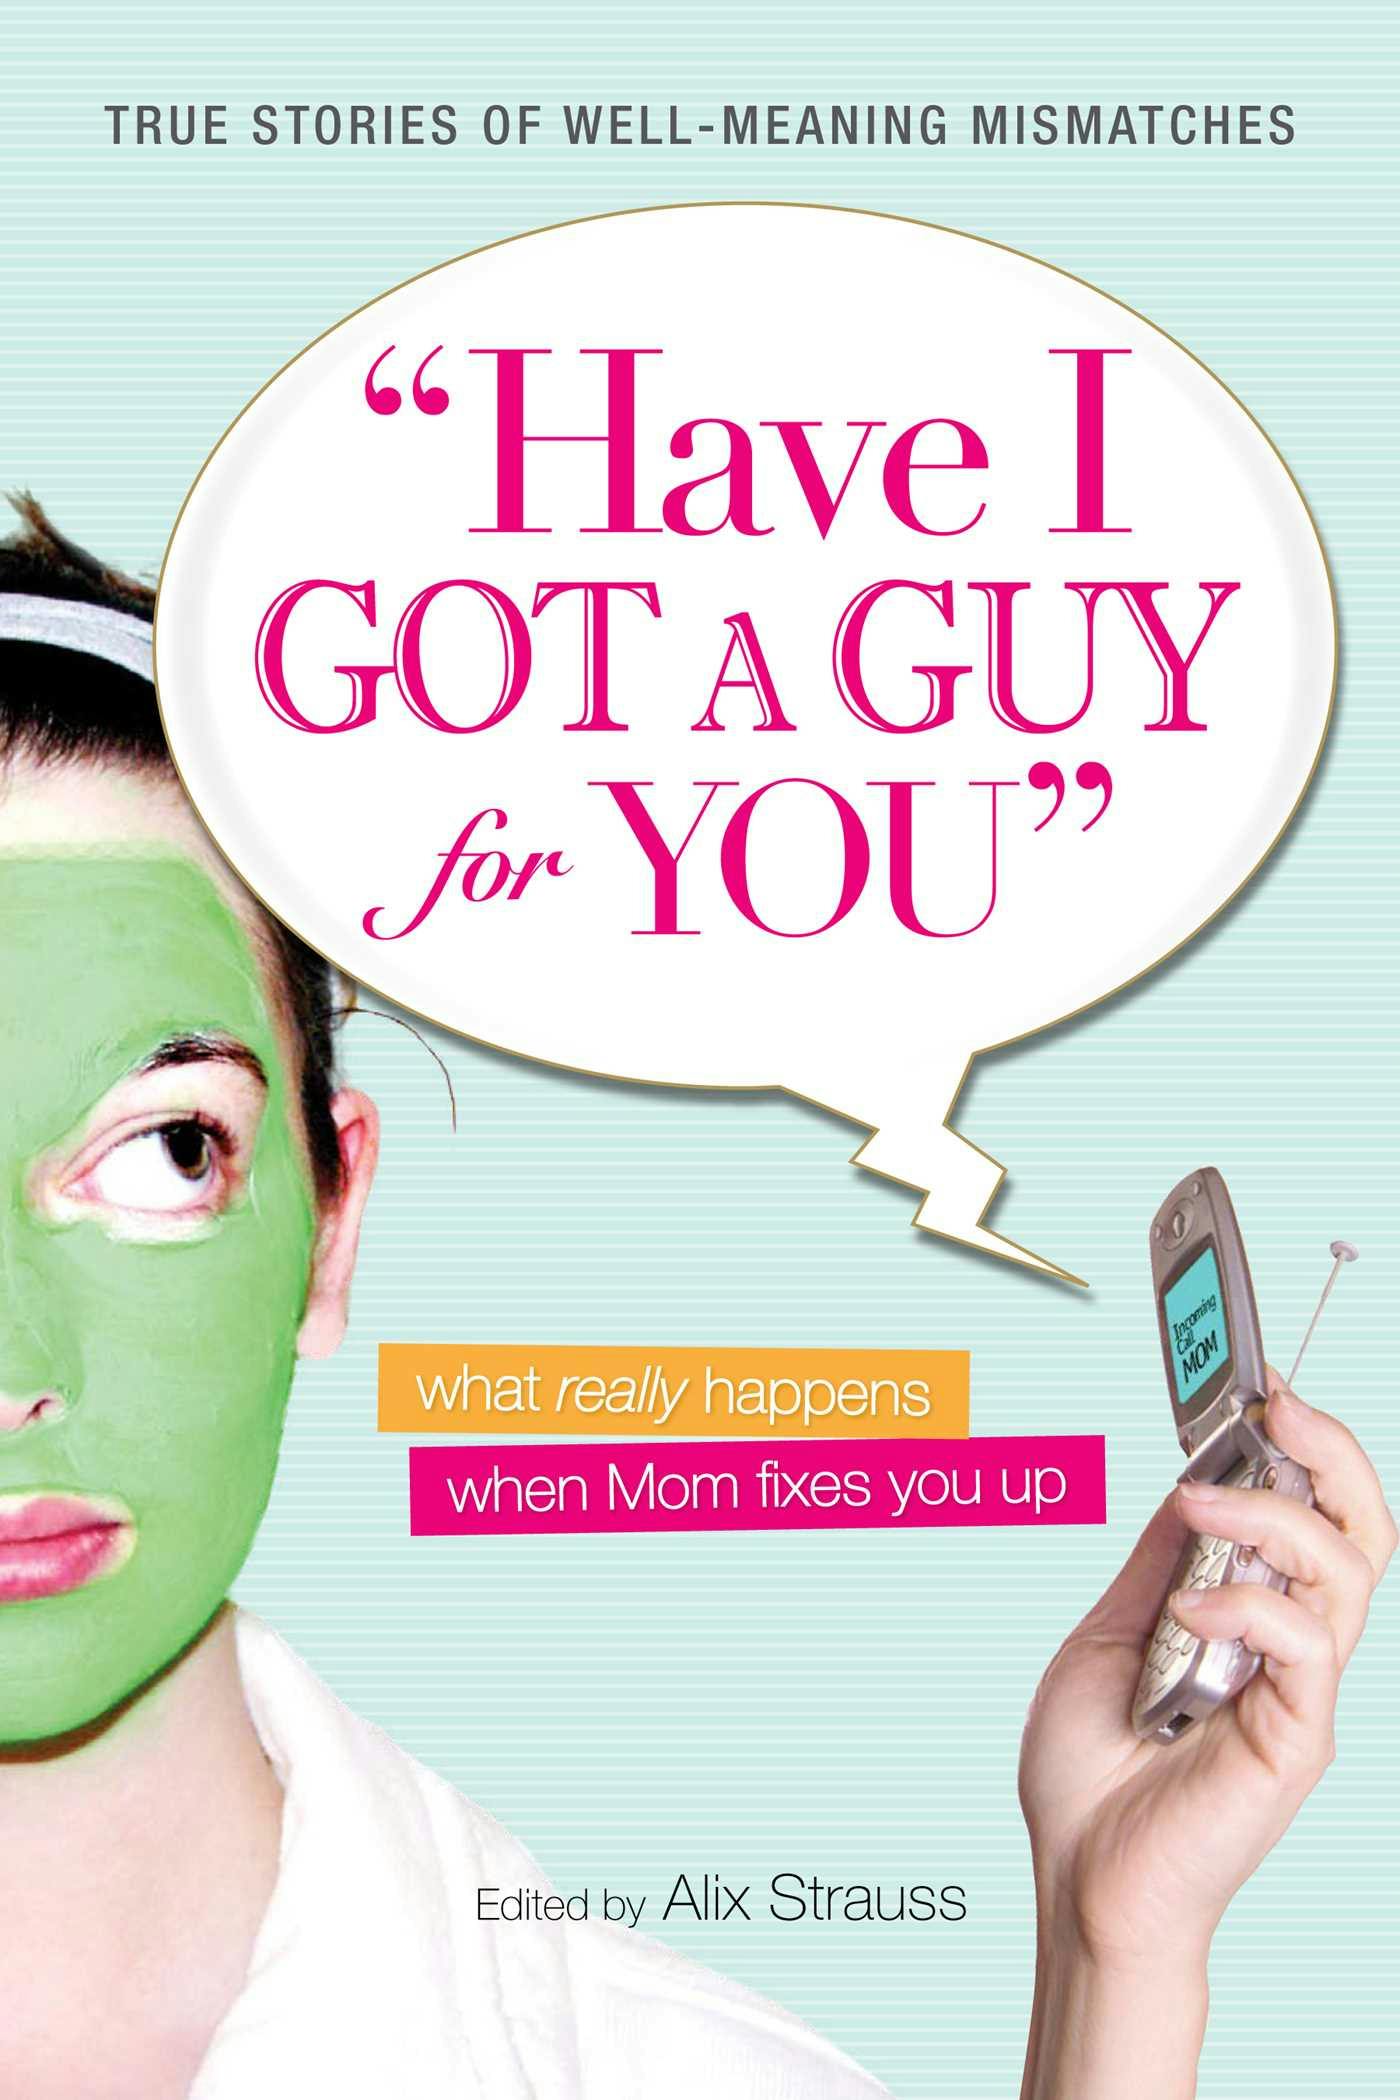 Have I Got a Guy for You: What Really Happens When Mom Fixes You Up - Alix Strauss